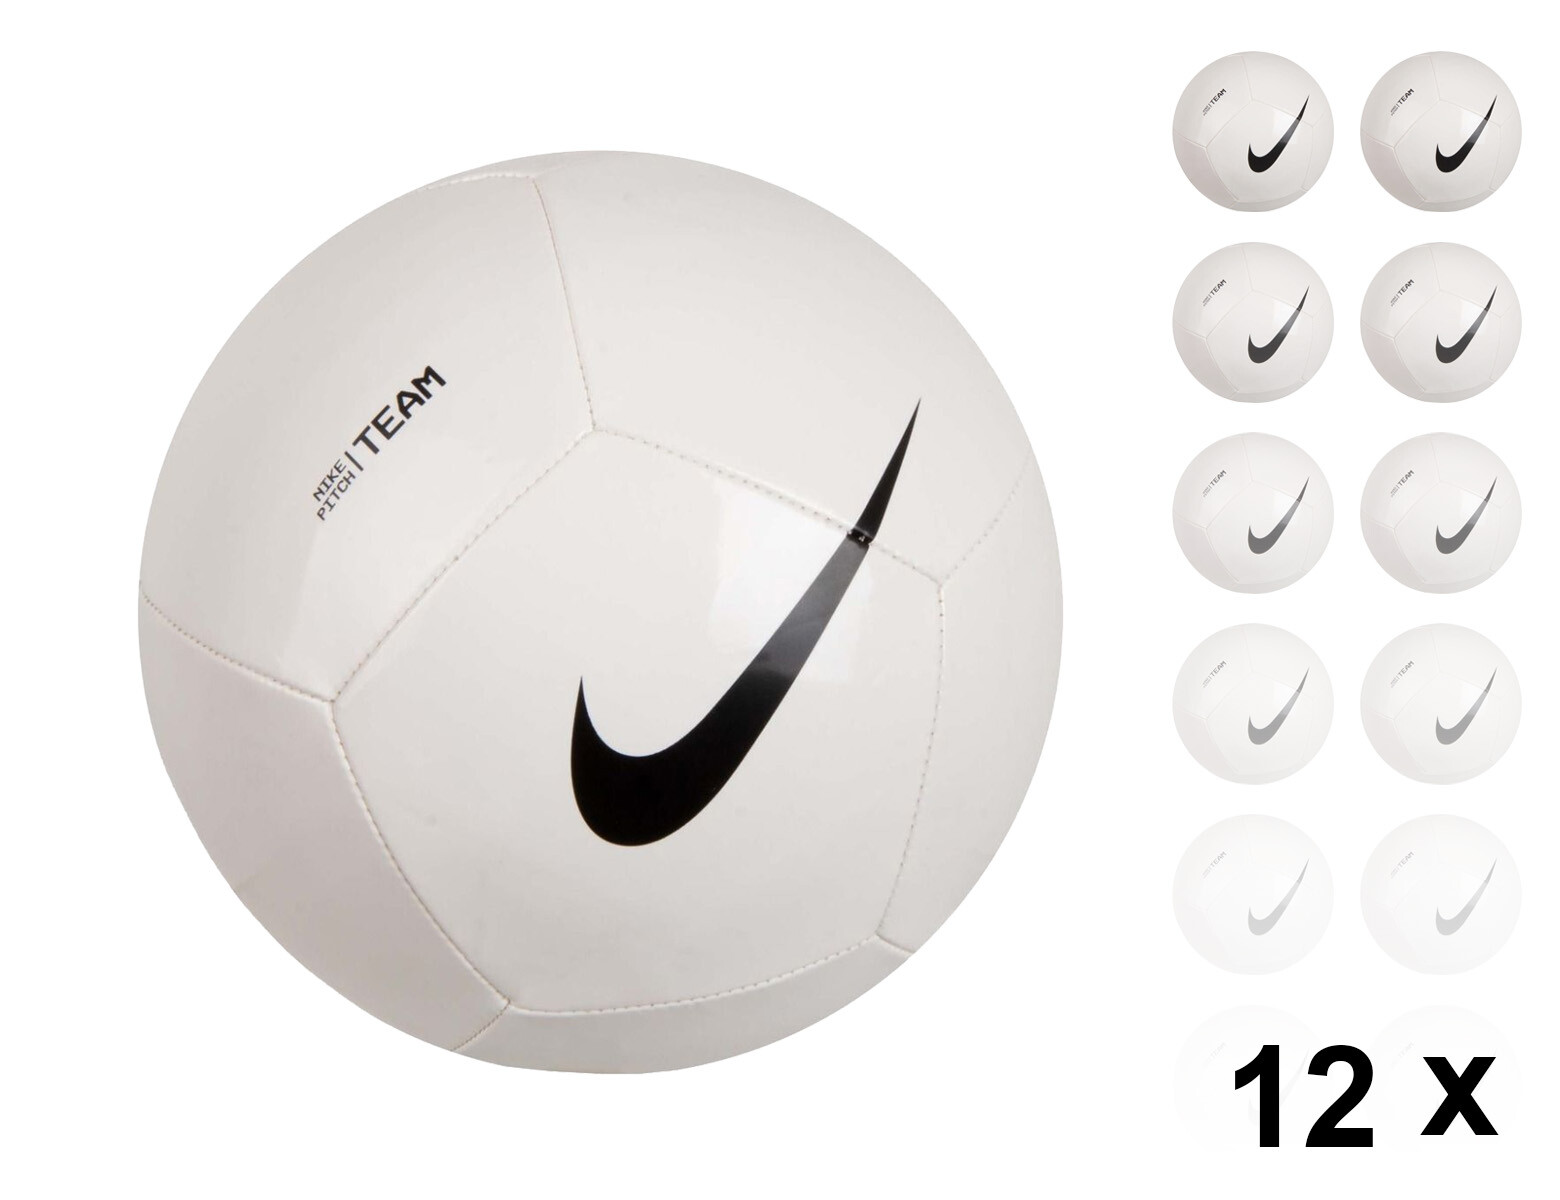 Nike Pitch Team Ball 12 Pack Voetballen Multipack